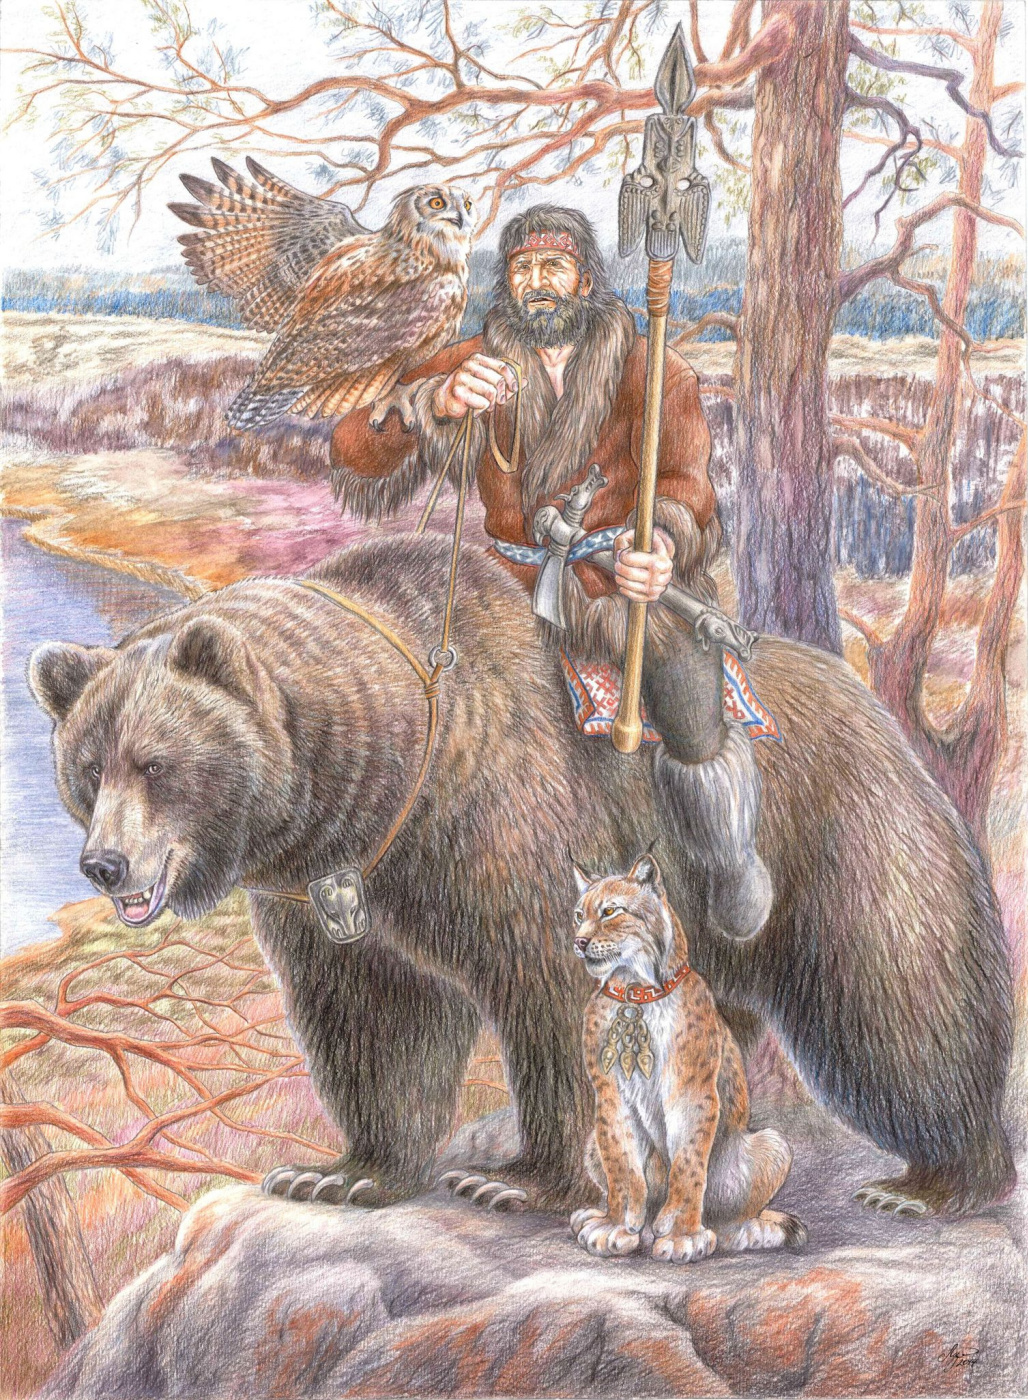 Anton Valerievich Shkurko. "Guardians of the Forests of the Urals"